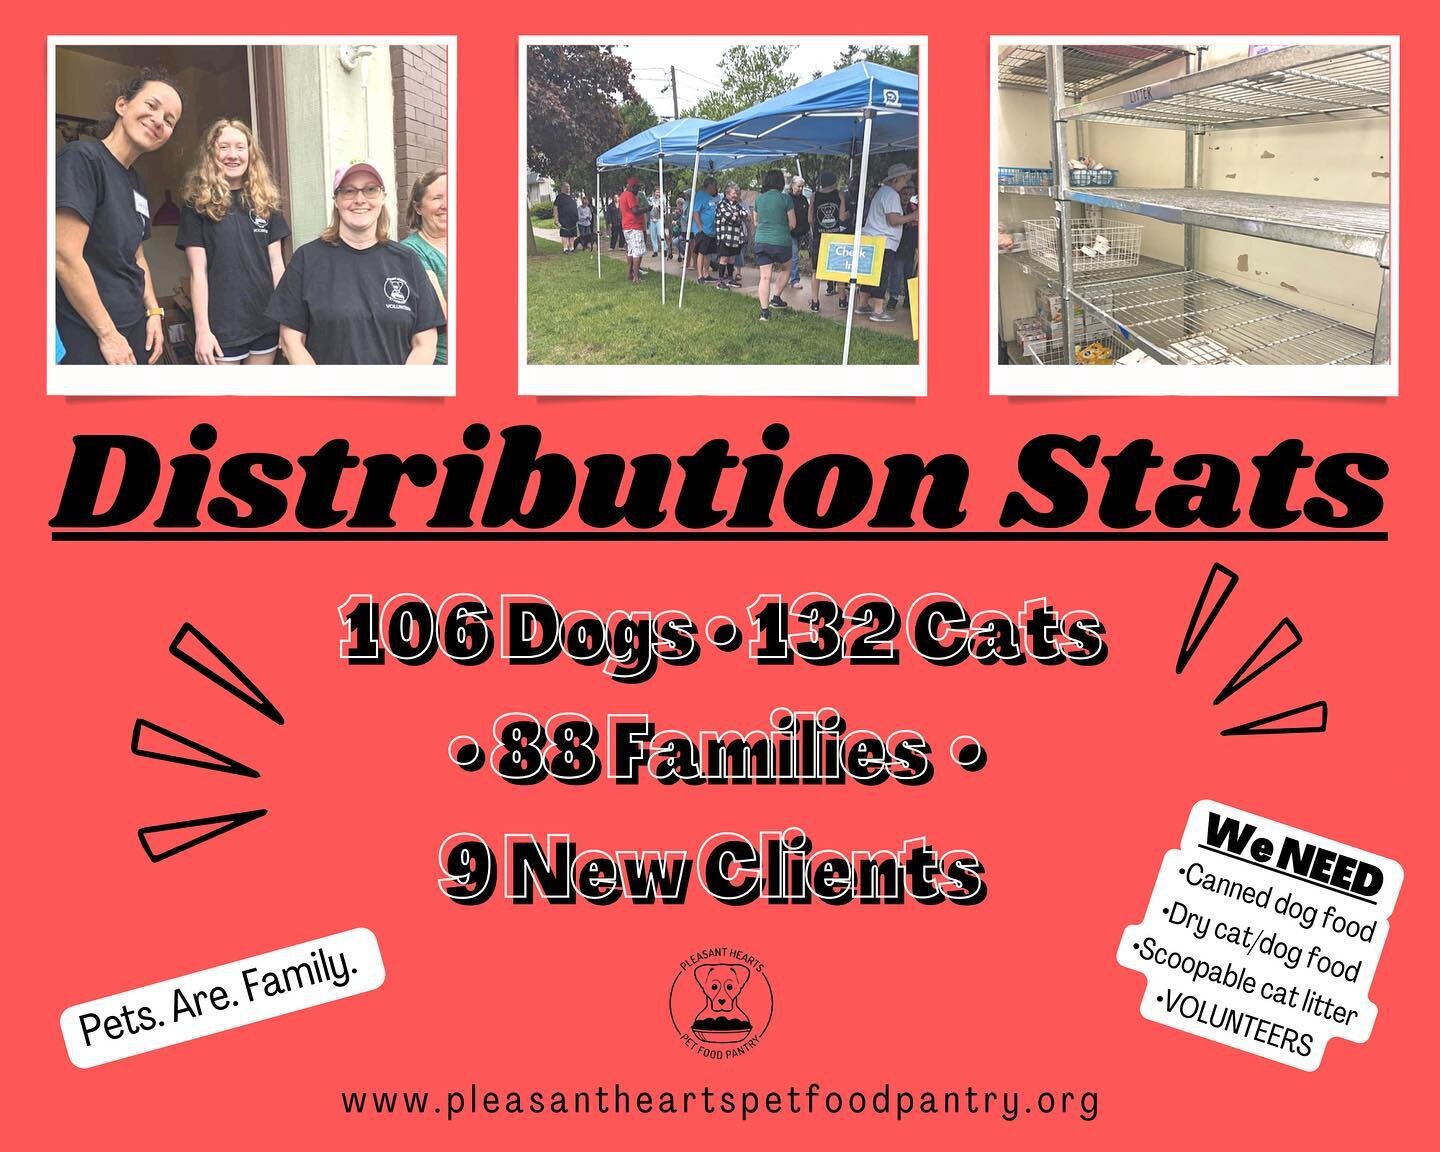 &hearts;️Another wonderful distribution day in the books! We&rsquo;re still getting in the swing of our new system &amp; working on improving it but all is going well! We can&rsquo;t thank our clients &amp; volunteers for being so flexible &amp; unde